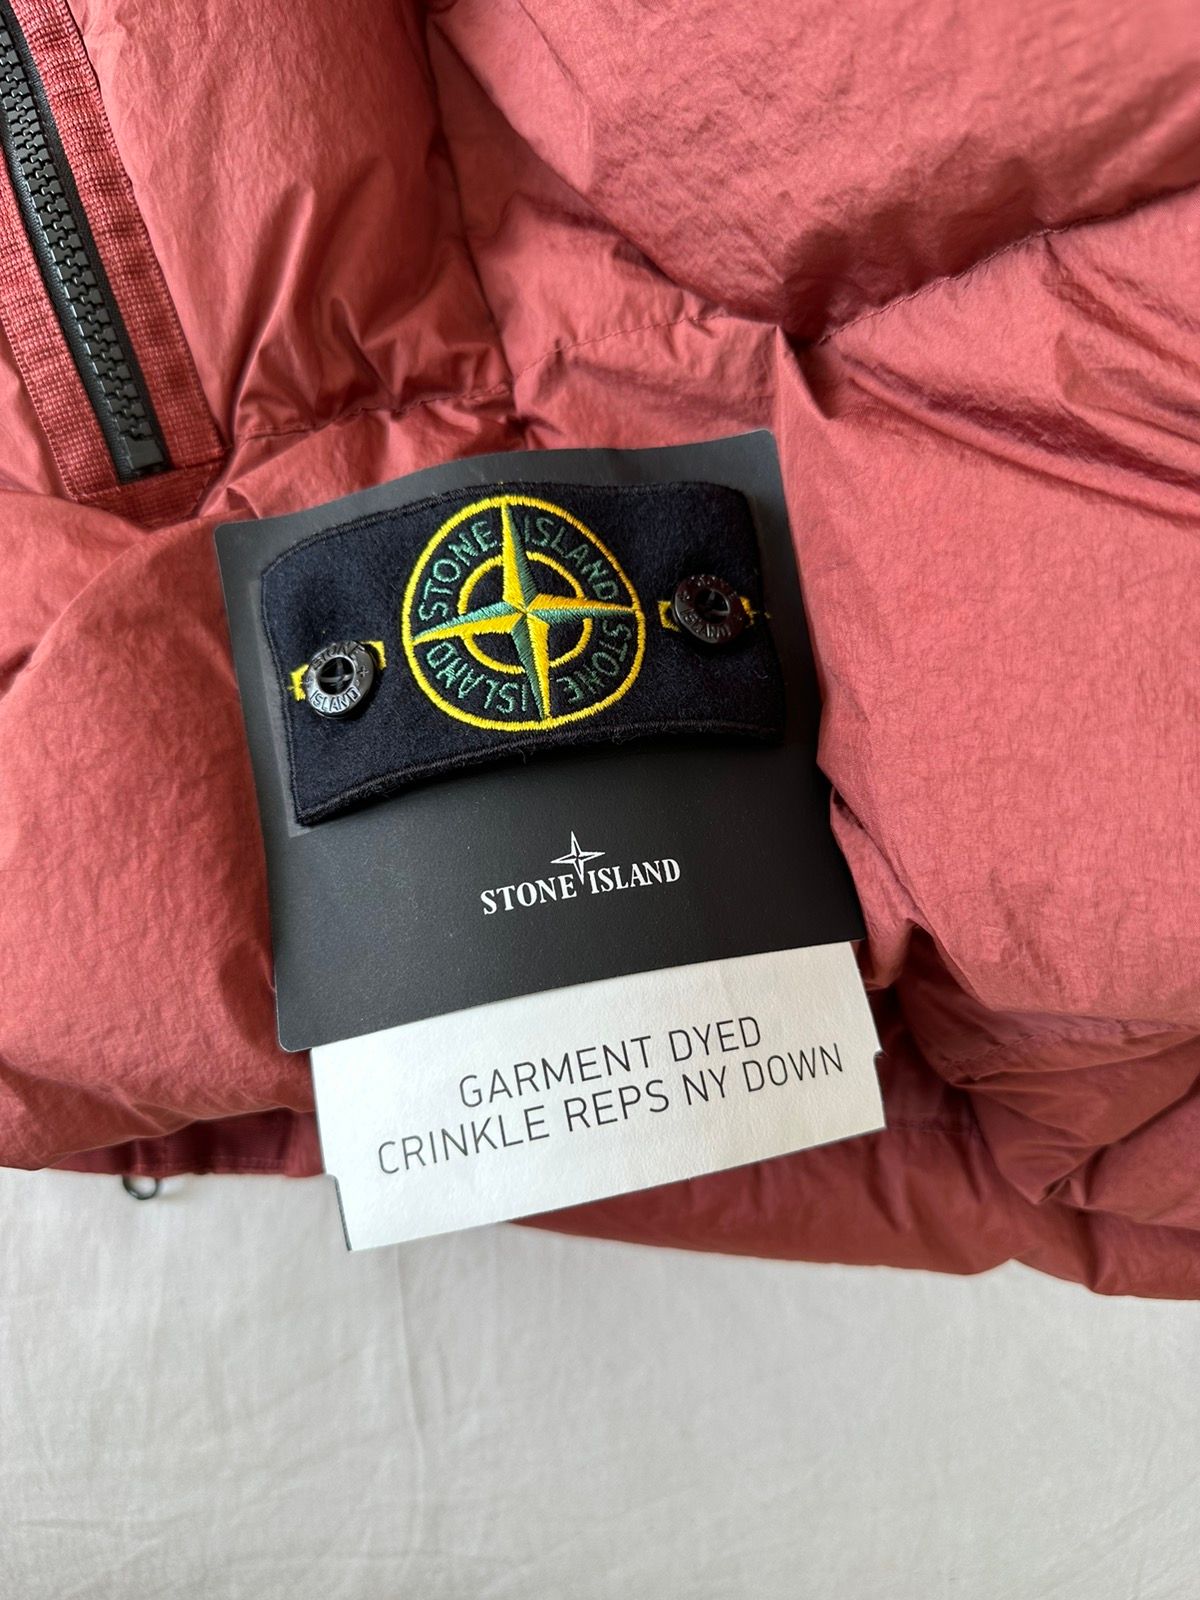 Stone Island Garment Dyed Crinkle Reps NY Down Vest - 4